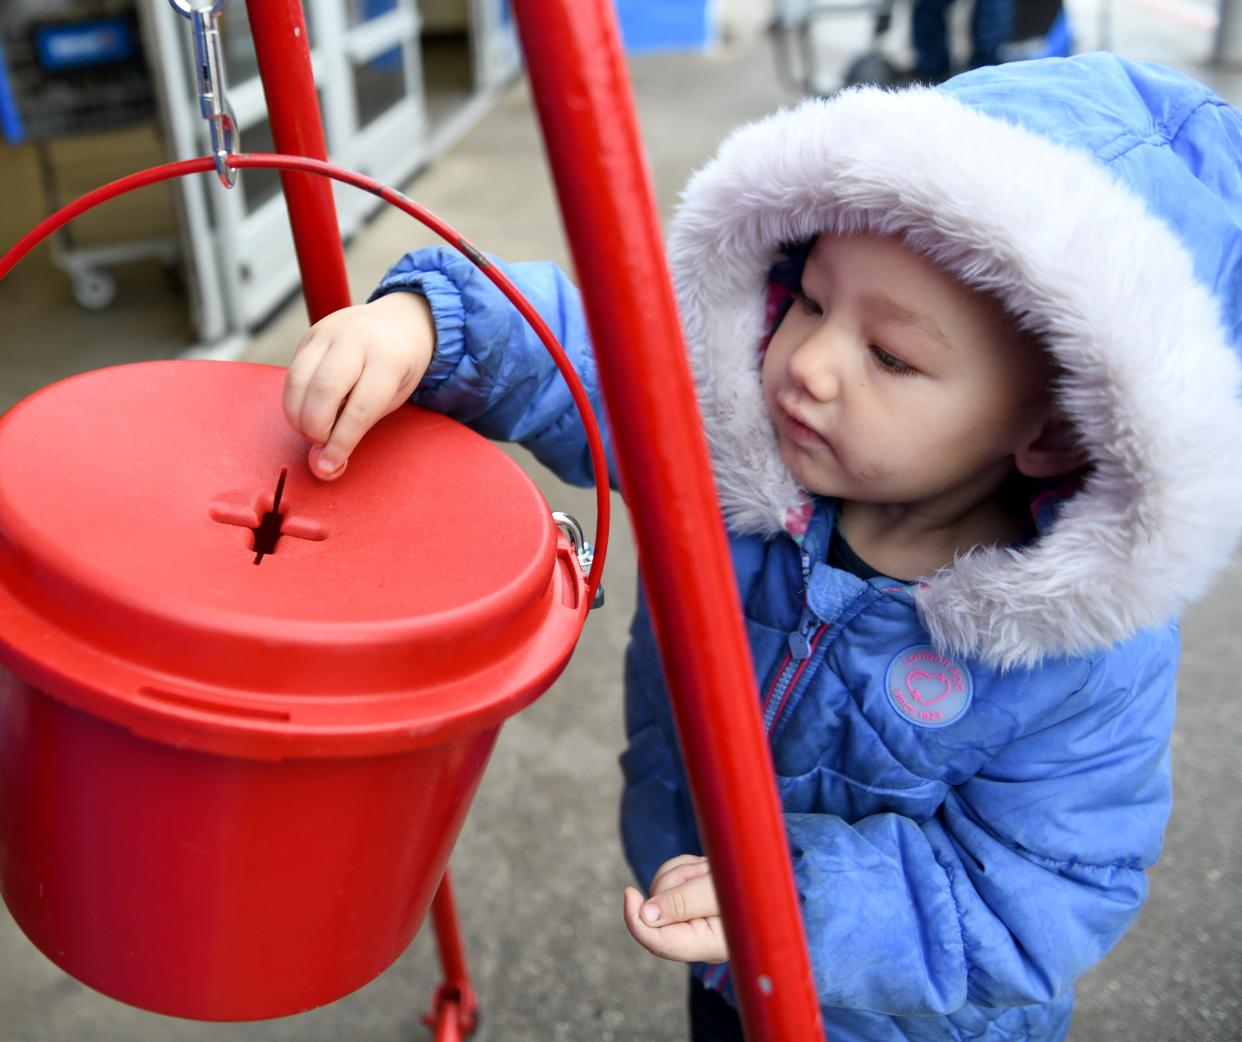 Ka'Myah Todd drops change into a Salvation Army kettle on Wednesday, Dec. 7, 2022, at Walmart.